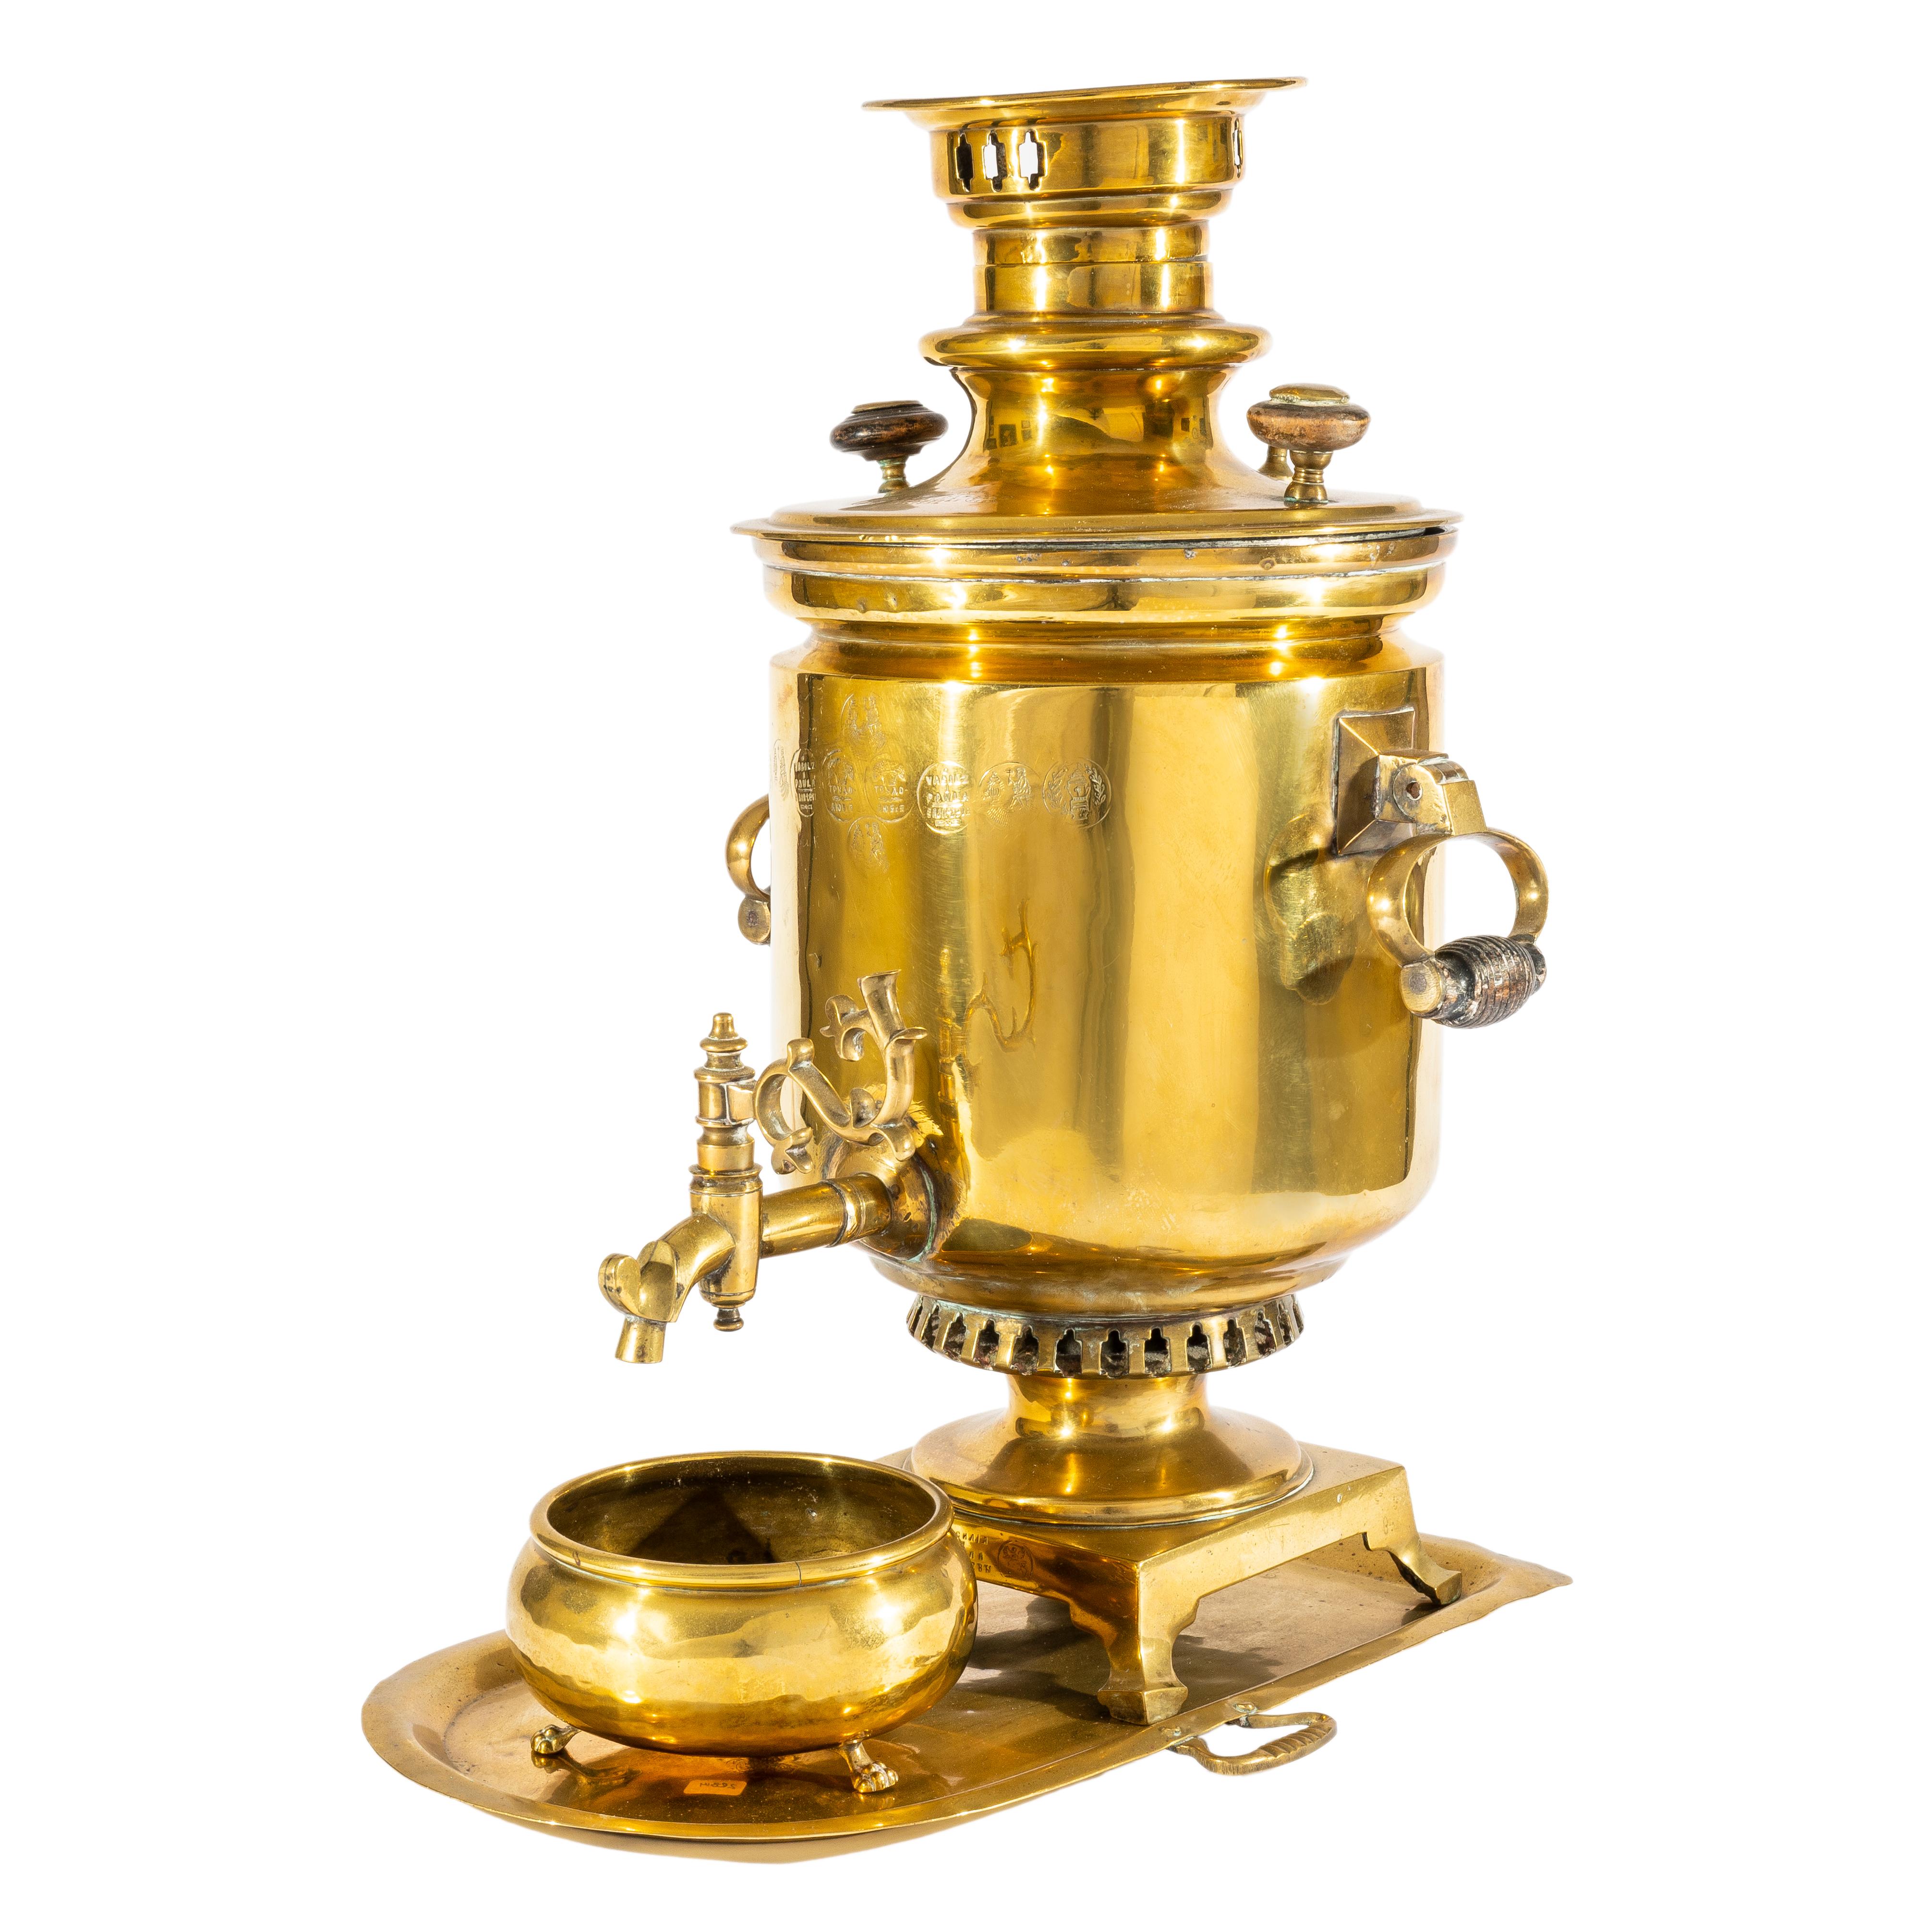 Of typical form in the Russian imperial style, a classic samovar set tooled in brass comprising a brass samovar, drip bowl and tray by Tula samovar masters, V.L. Batashev. The samovar cylindrical with turned wooden drop handles on a square pedestal